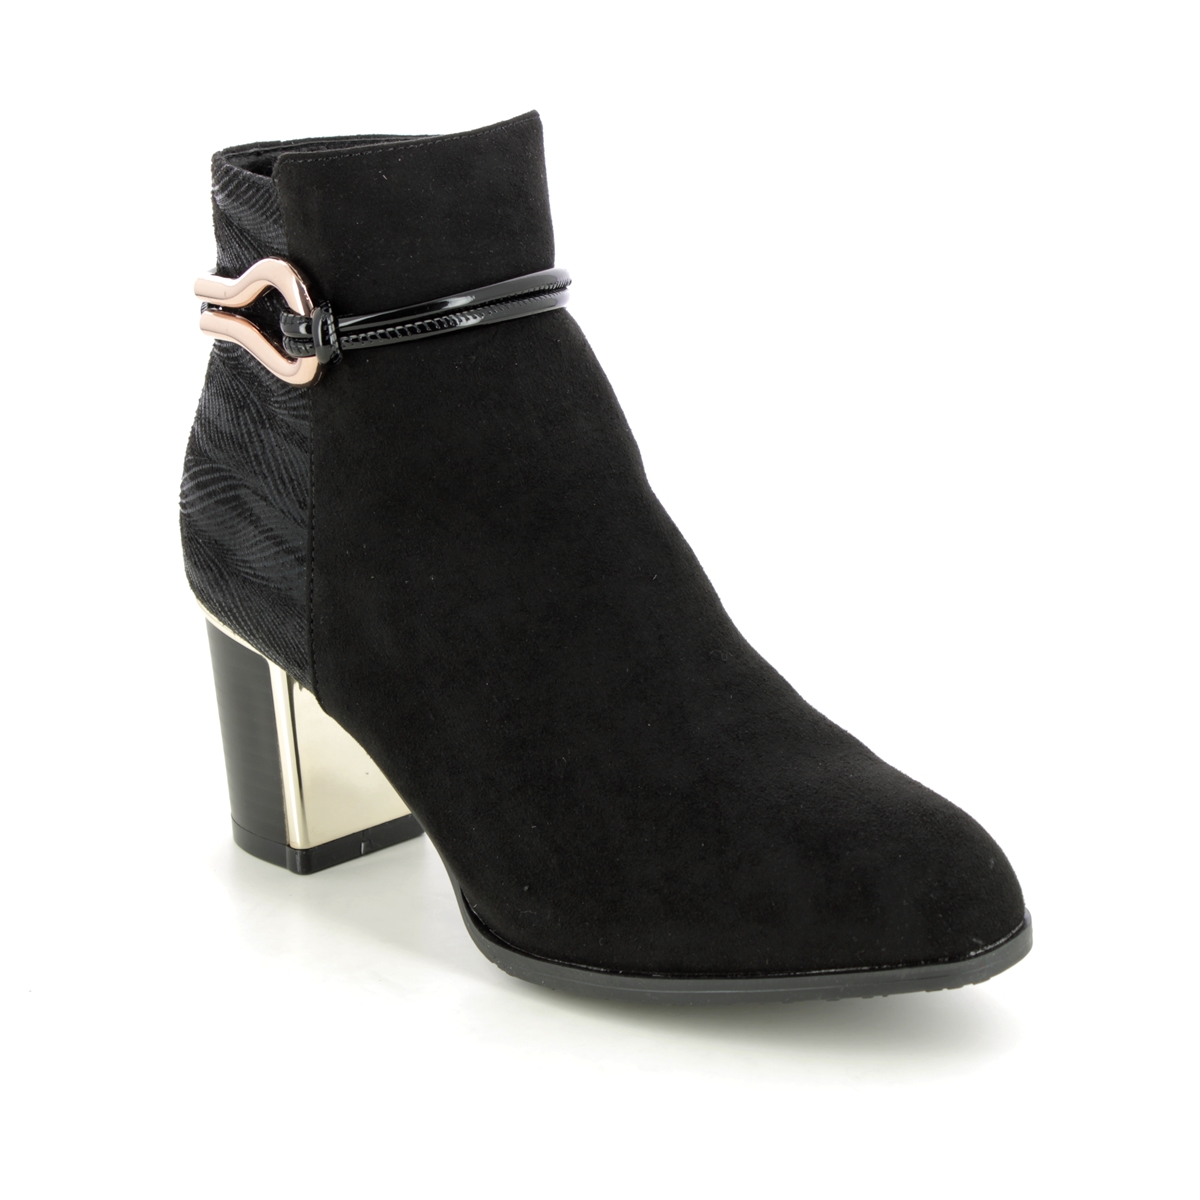 Lotus Autumn Greeve Black Womens Heeled Boots in a Plain  in Size 3